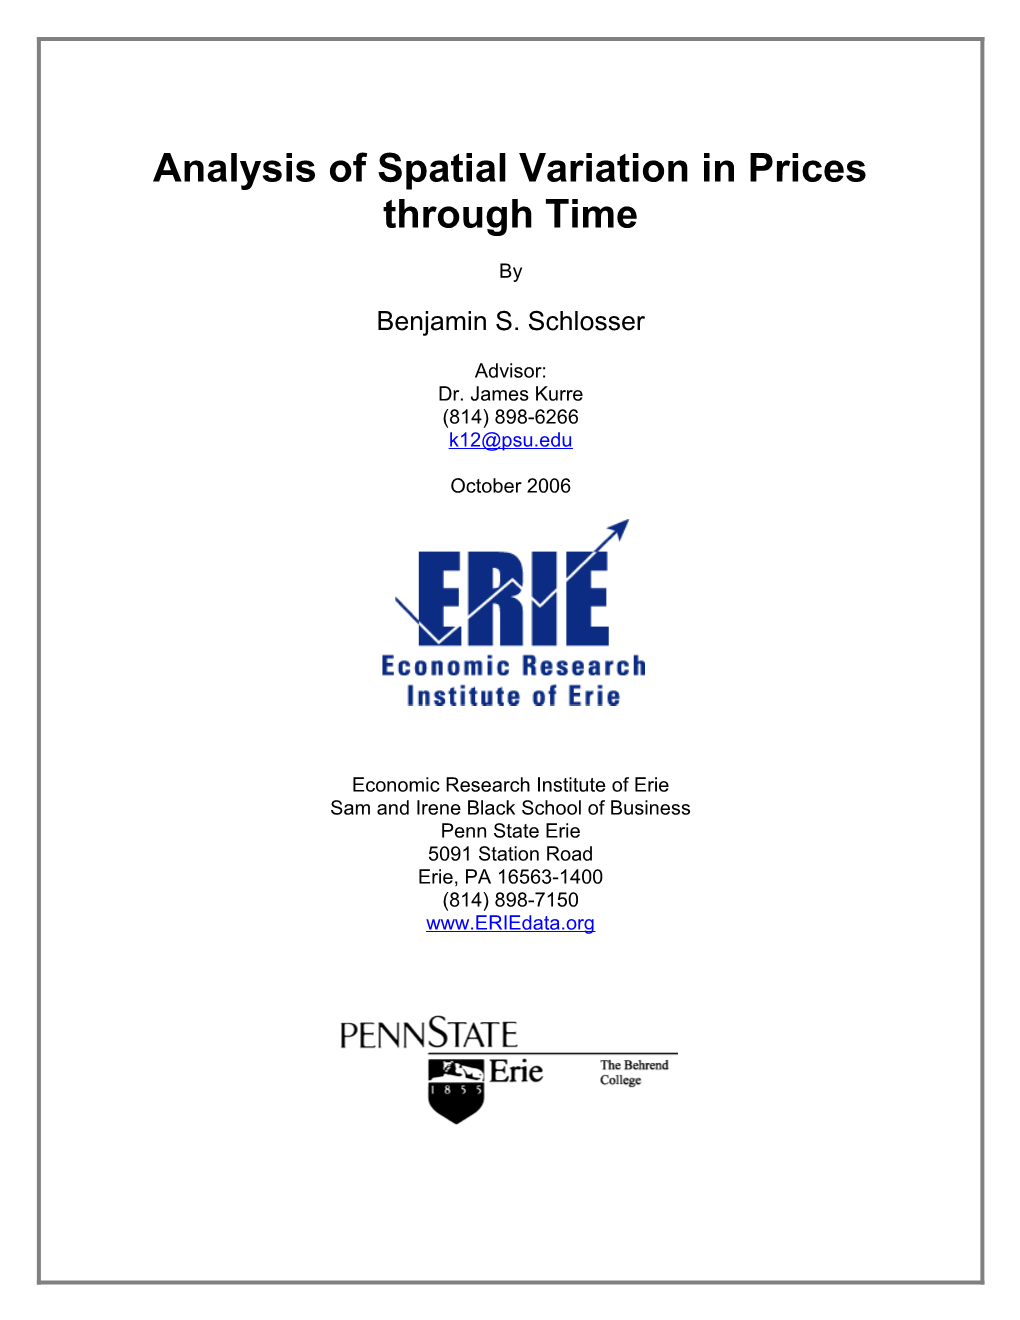 Analysis of Spatial Variation in Prices Through Time